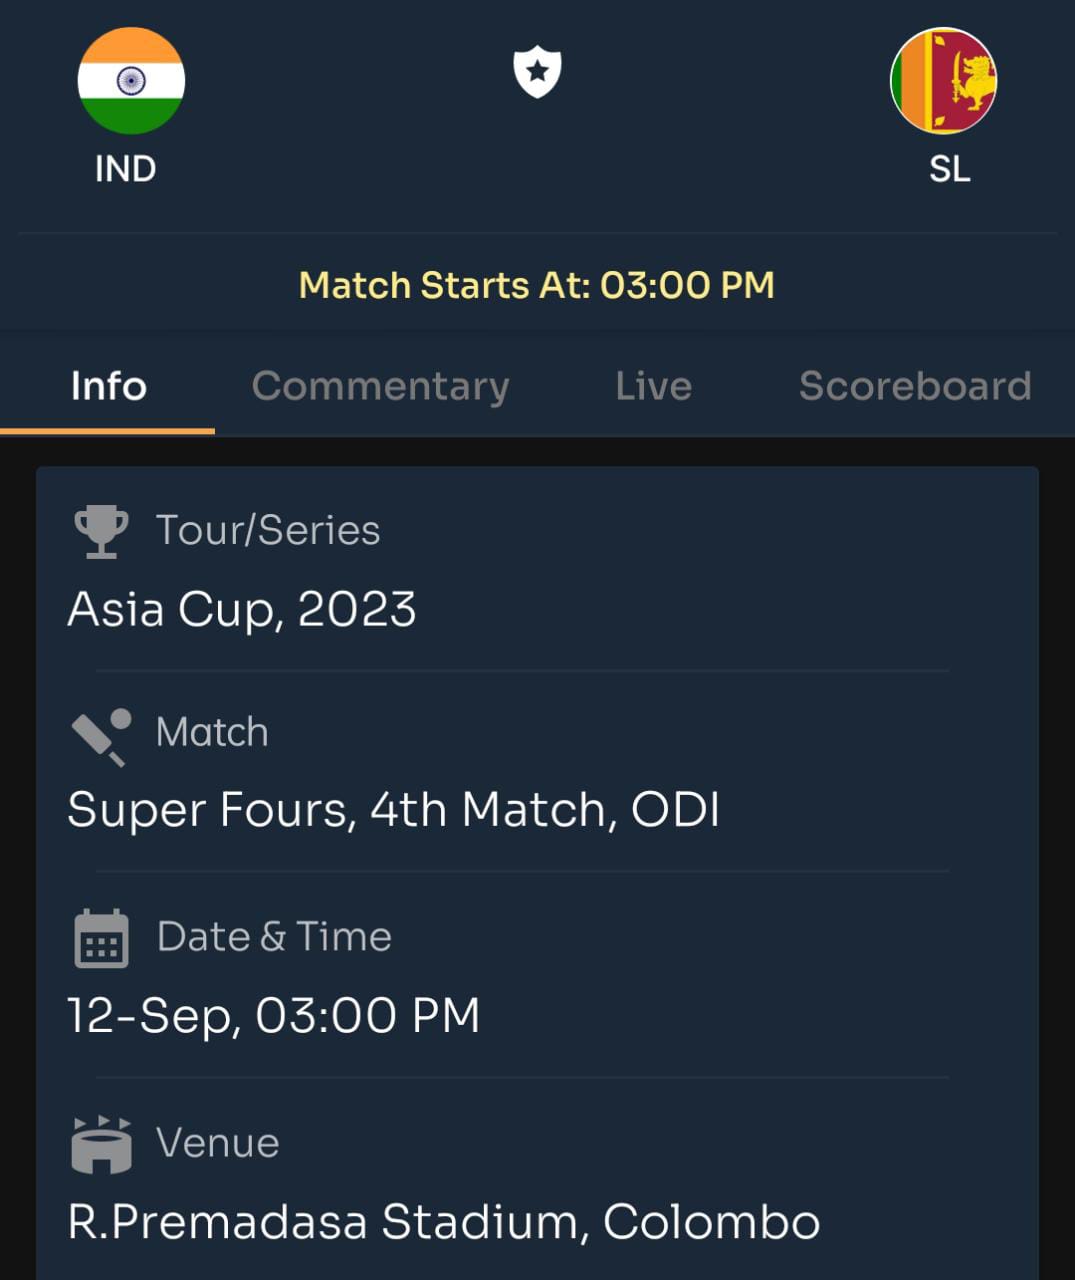 Srilanka vs India Asia Cup Match Prediction | Fantasy Dream Team Prediction | Toss Analysis | Pitch & Weather Report